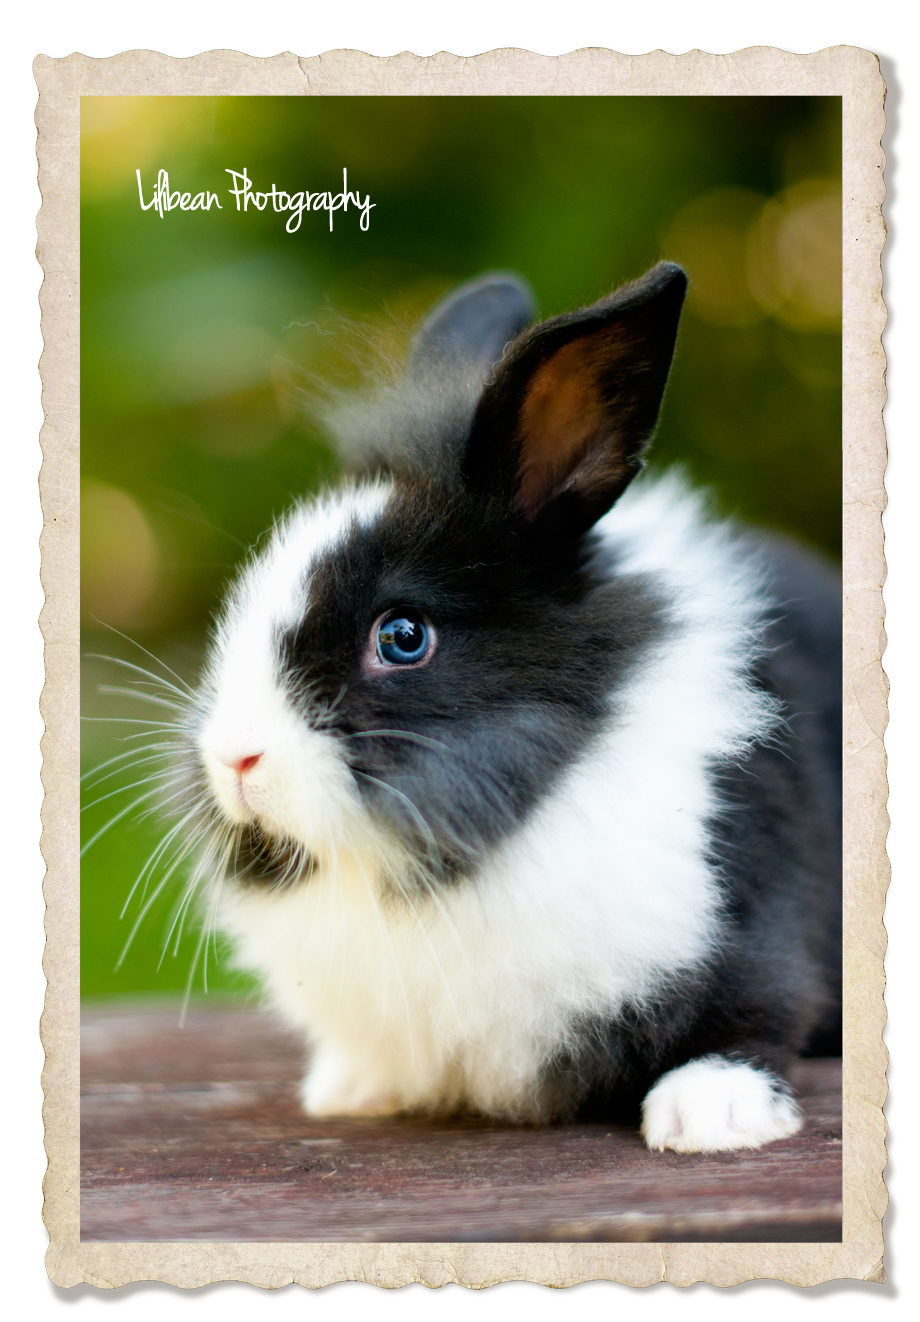 Bunny Photo Sessions in South Florida